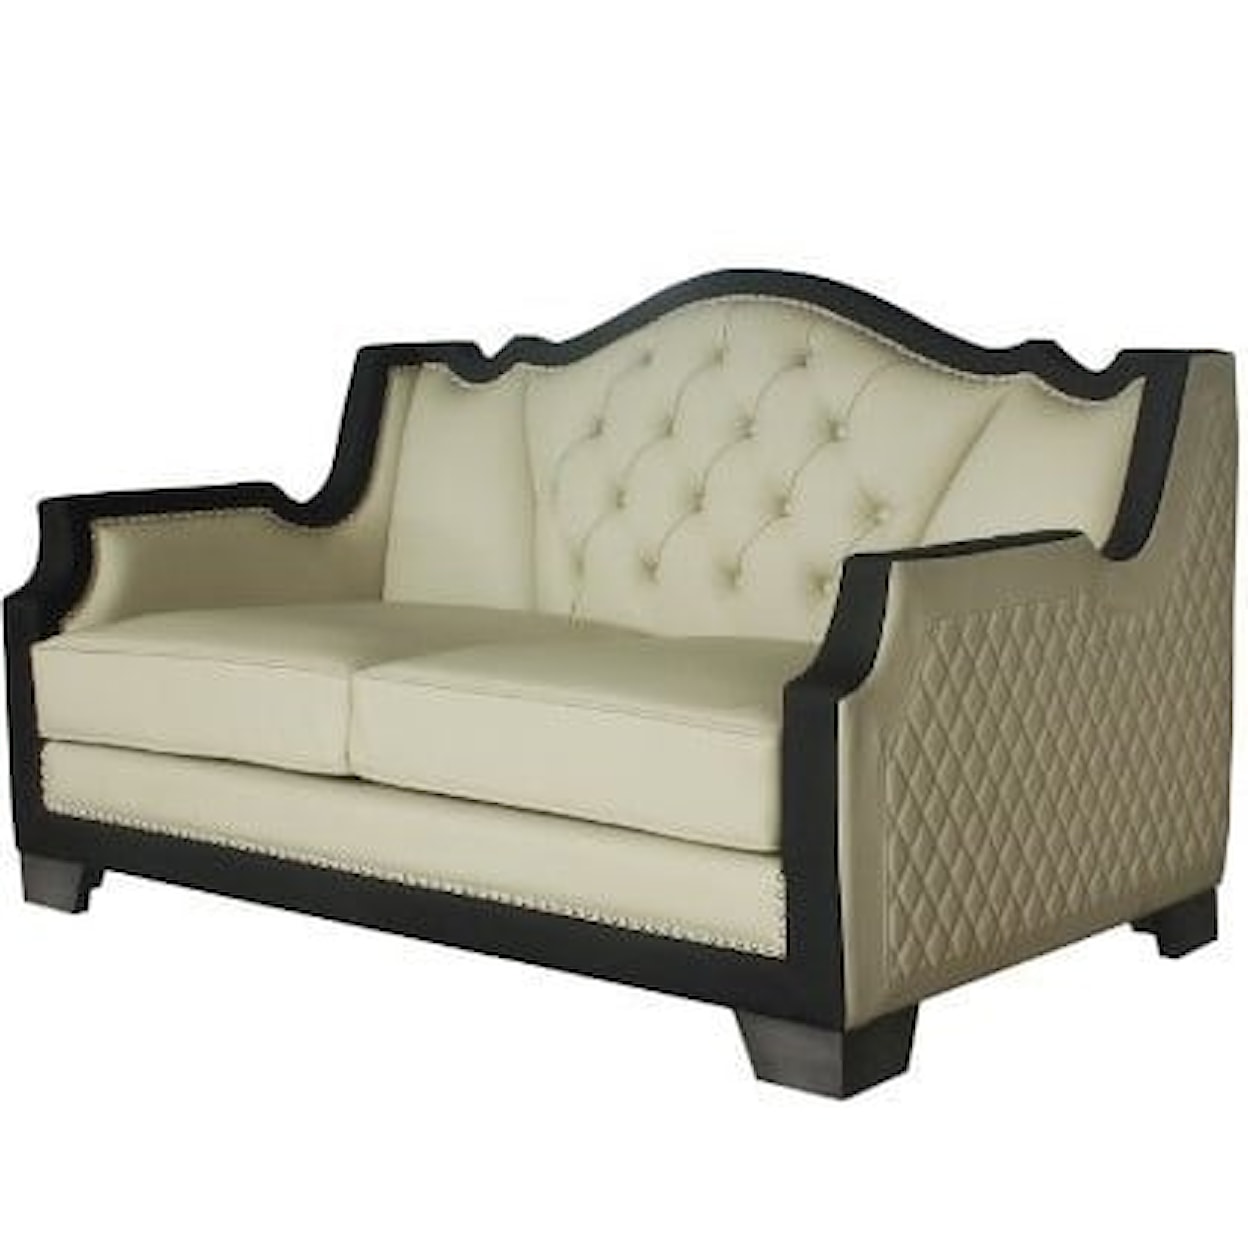 Acme Furniture House Beatrice Loveseat W/2 Pillows